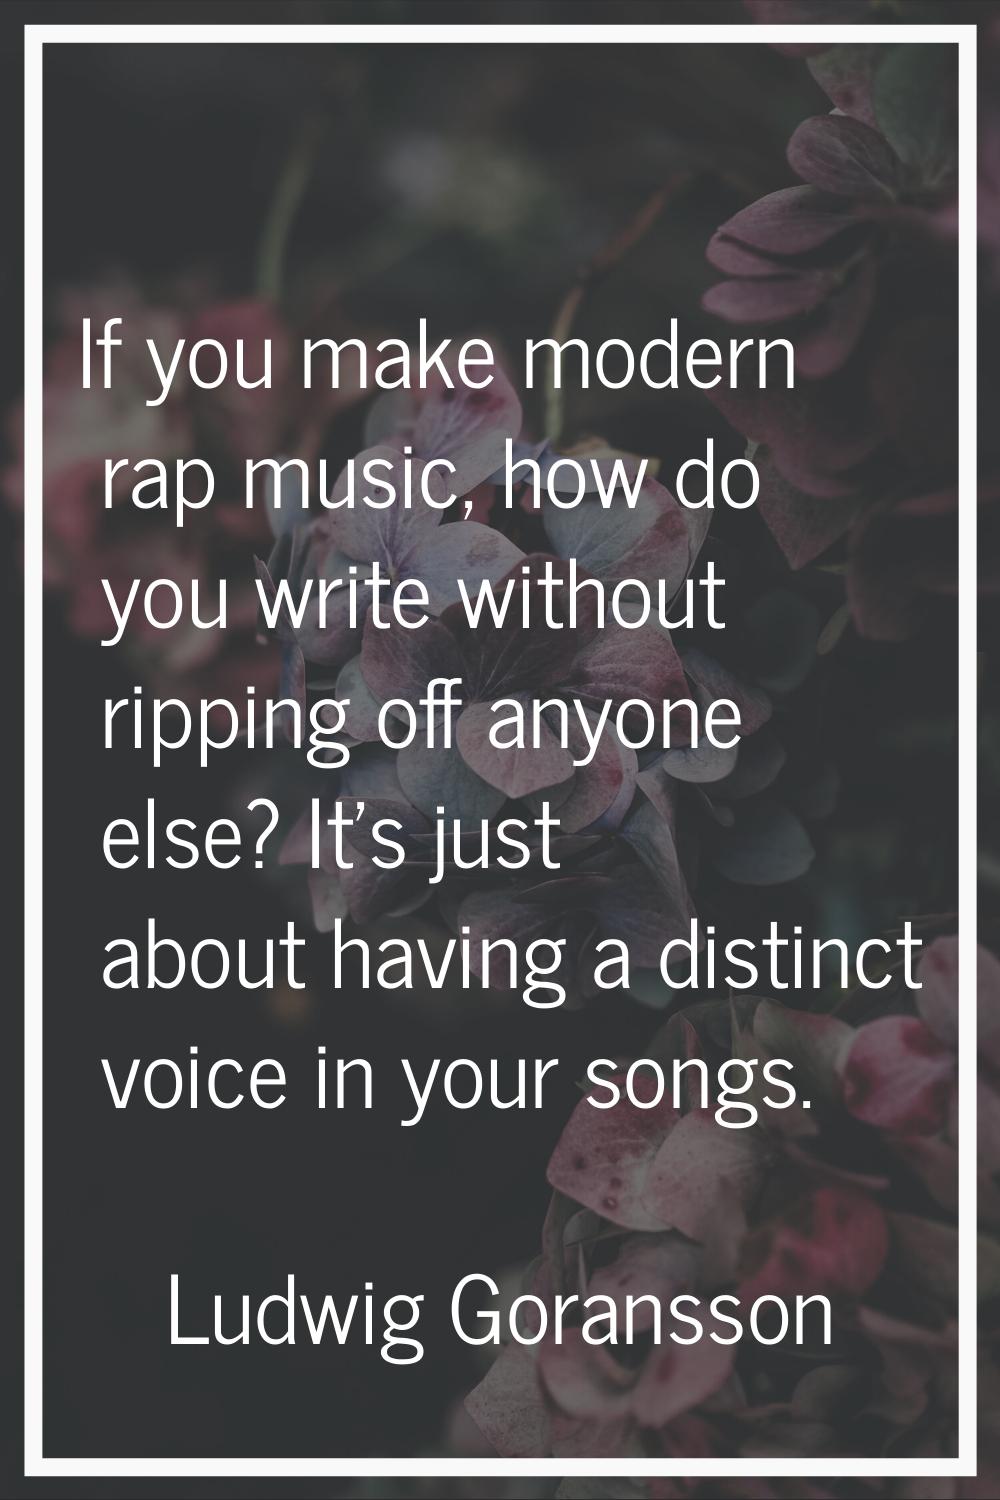 If you make modern rap music, how do you write without ripping off anyone else? It's just about hav